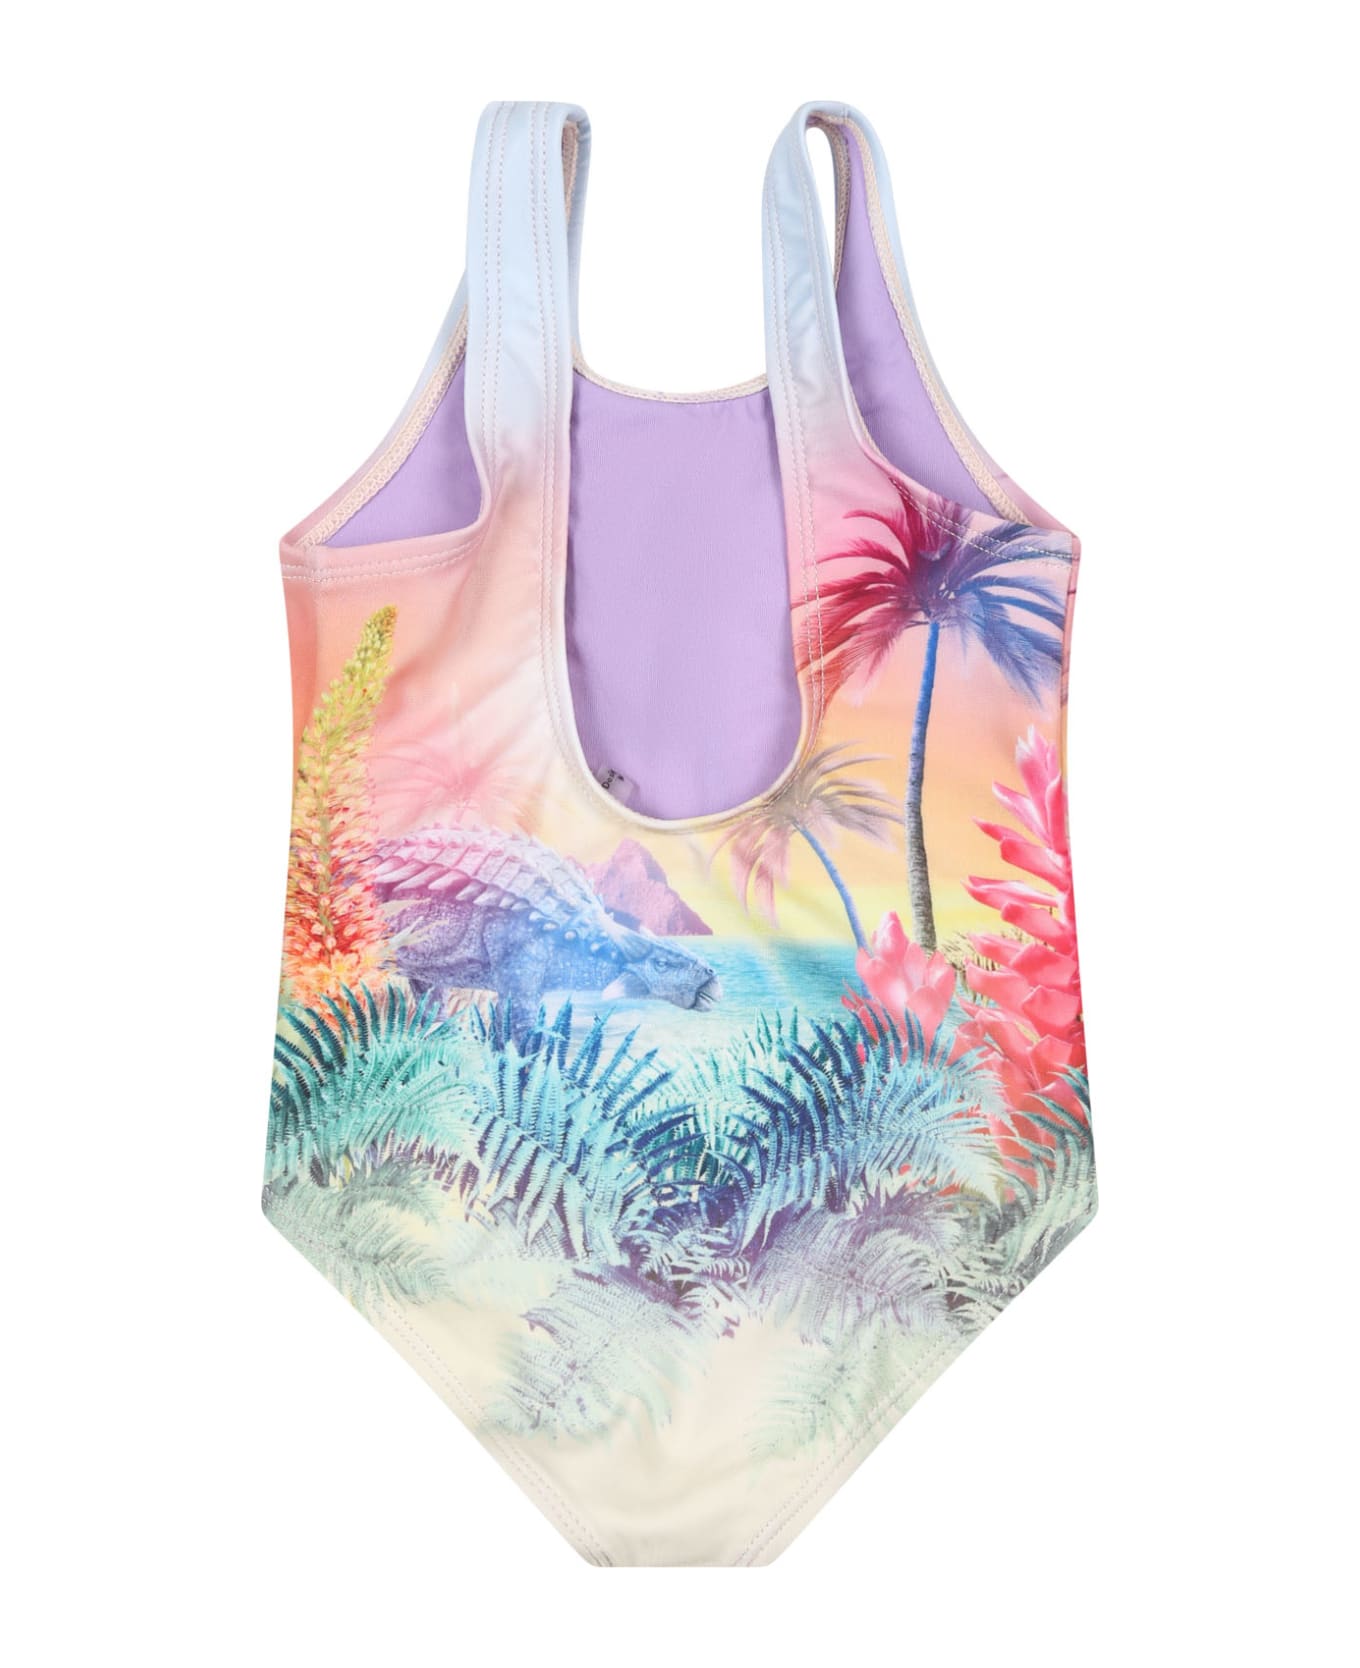 Molo Purple One-piece Swimsuit For Bebe Girl With Dinosaur Print - Multicolor